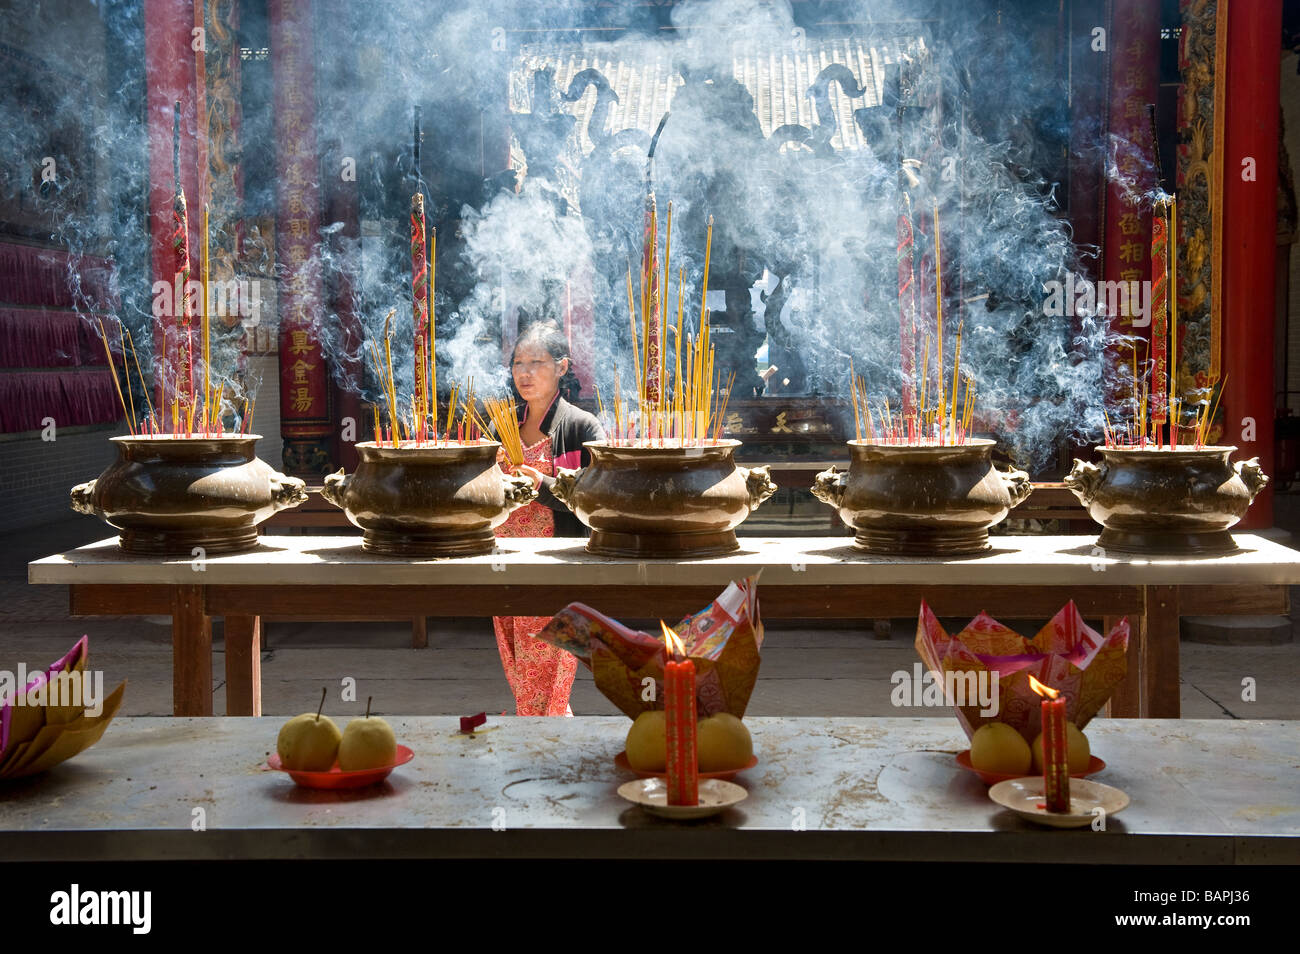 Incense and Candles Burning in Thien Hau Temple, Ho Chi Minh City, Vietnam. Stock Photo